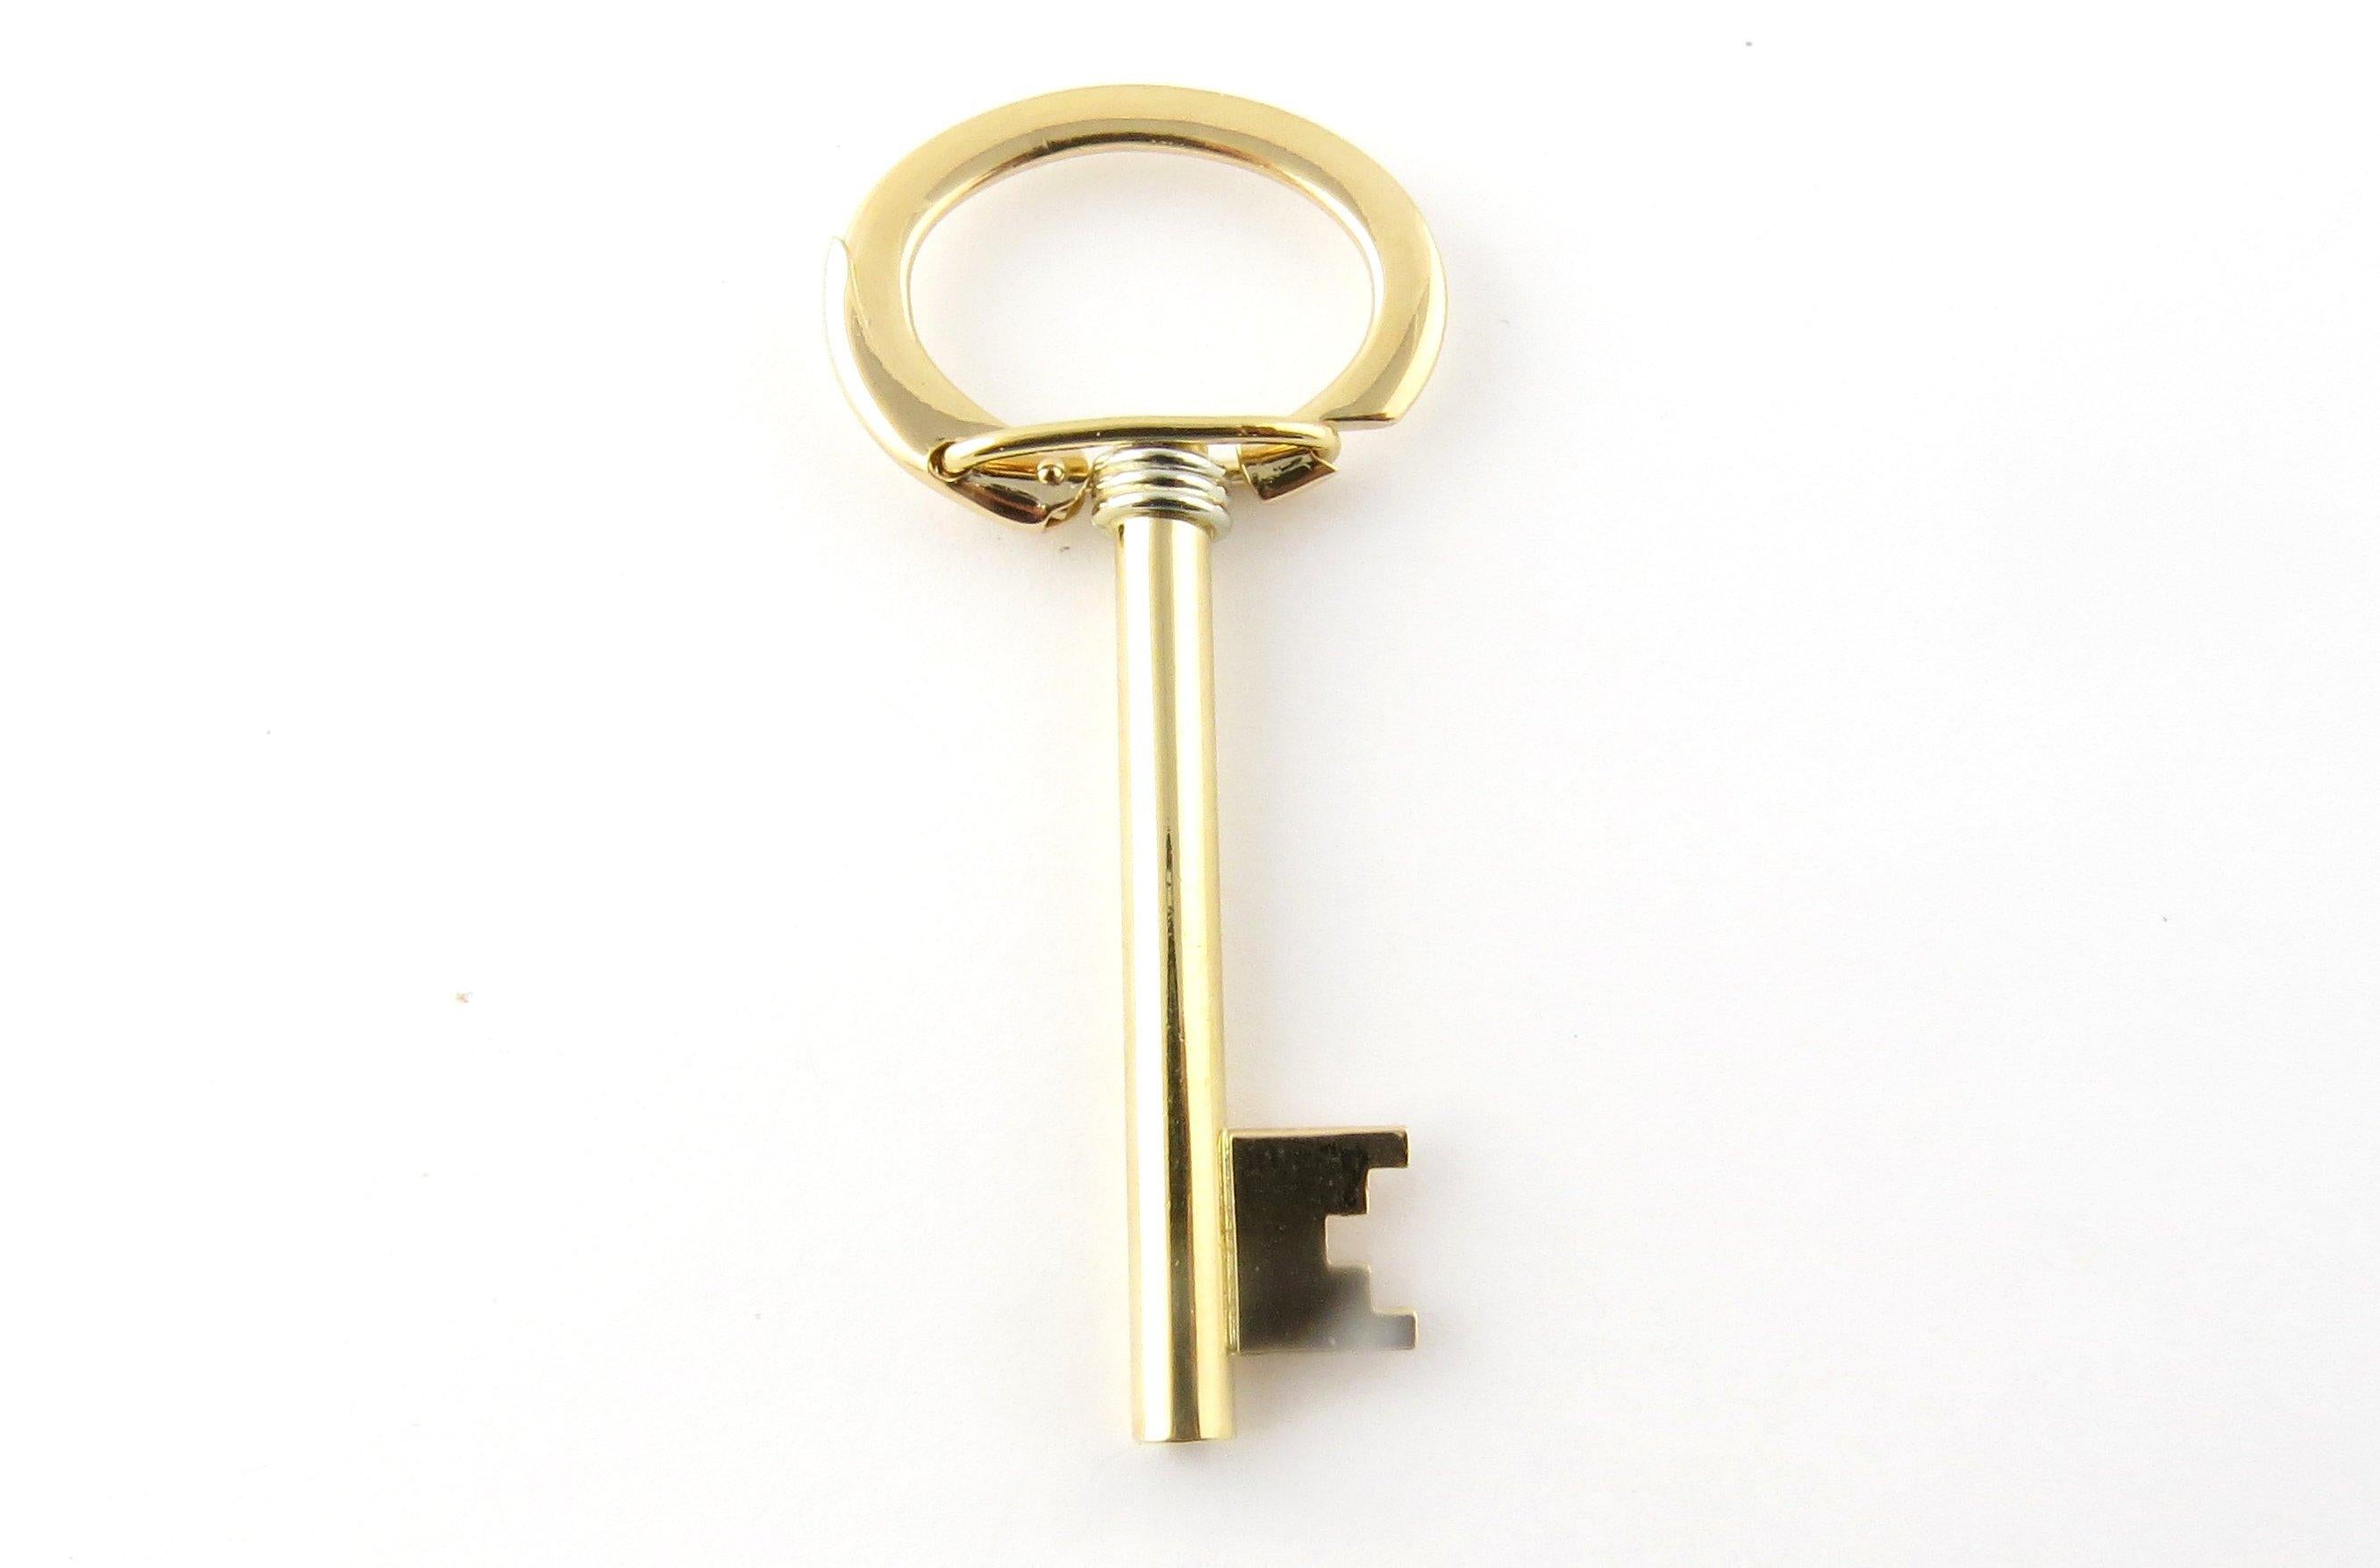 Vintage 18 Karat Yellow Gold Key Ring
This elegant key ring features a 3D skeleton key meticulously detailed in 18K yellow gold. 
Size: 55 mm x 25 mm 
Weight: 5.7 dwt. / 8.9 gr. 
Hallmark: 750 
Very good condition, professionally polished. 
Will